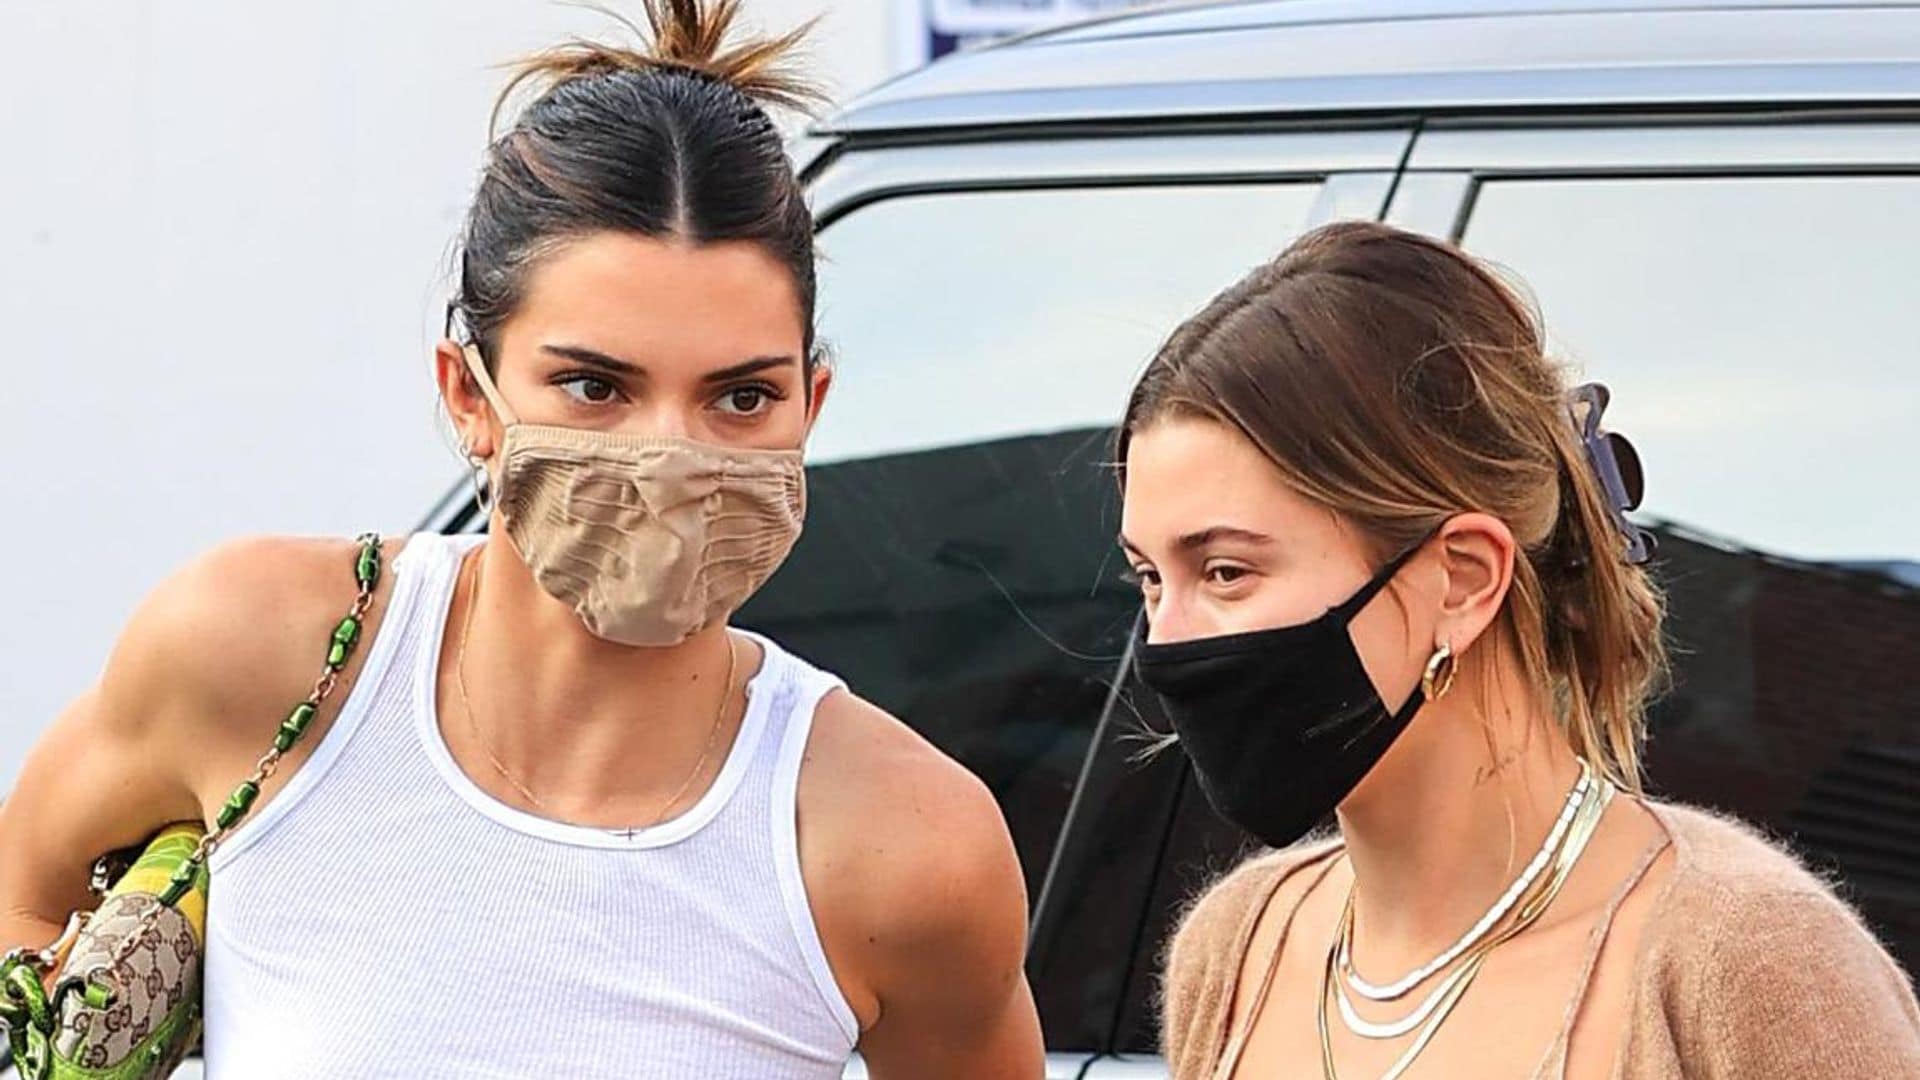 Kendall Jenner and Hailey Bieber show off their midriff for Santa Monica shopping trip